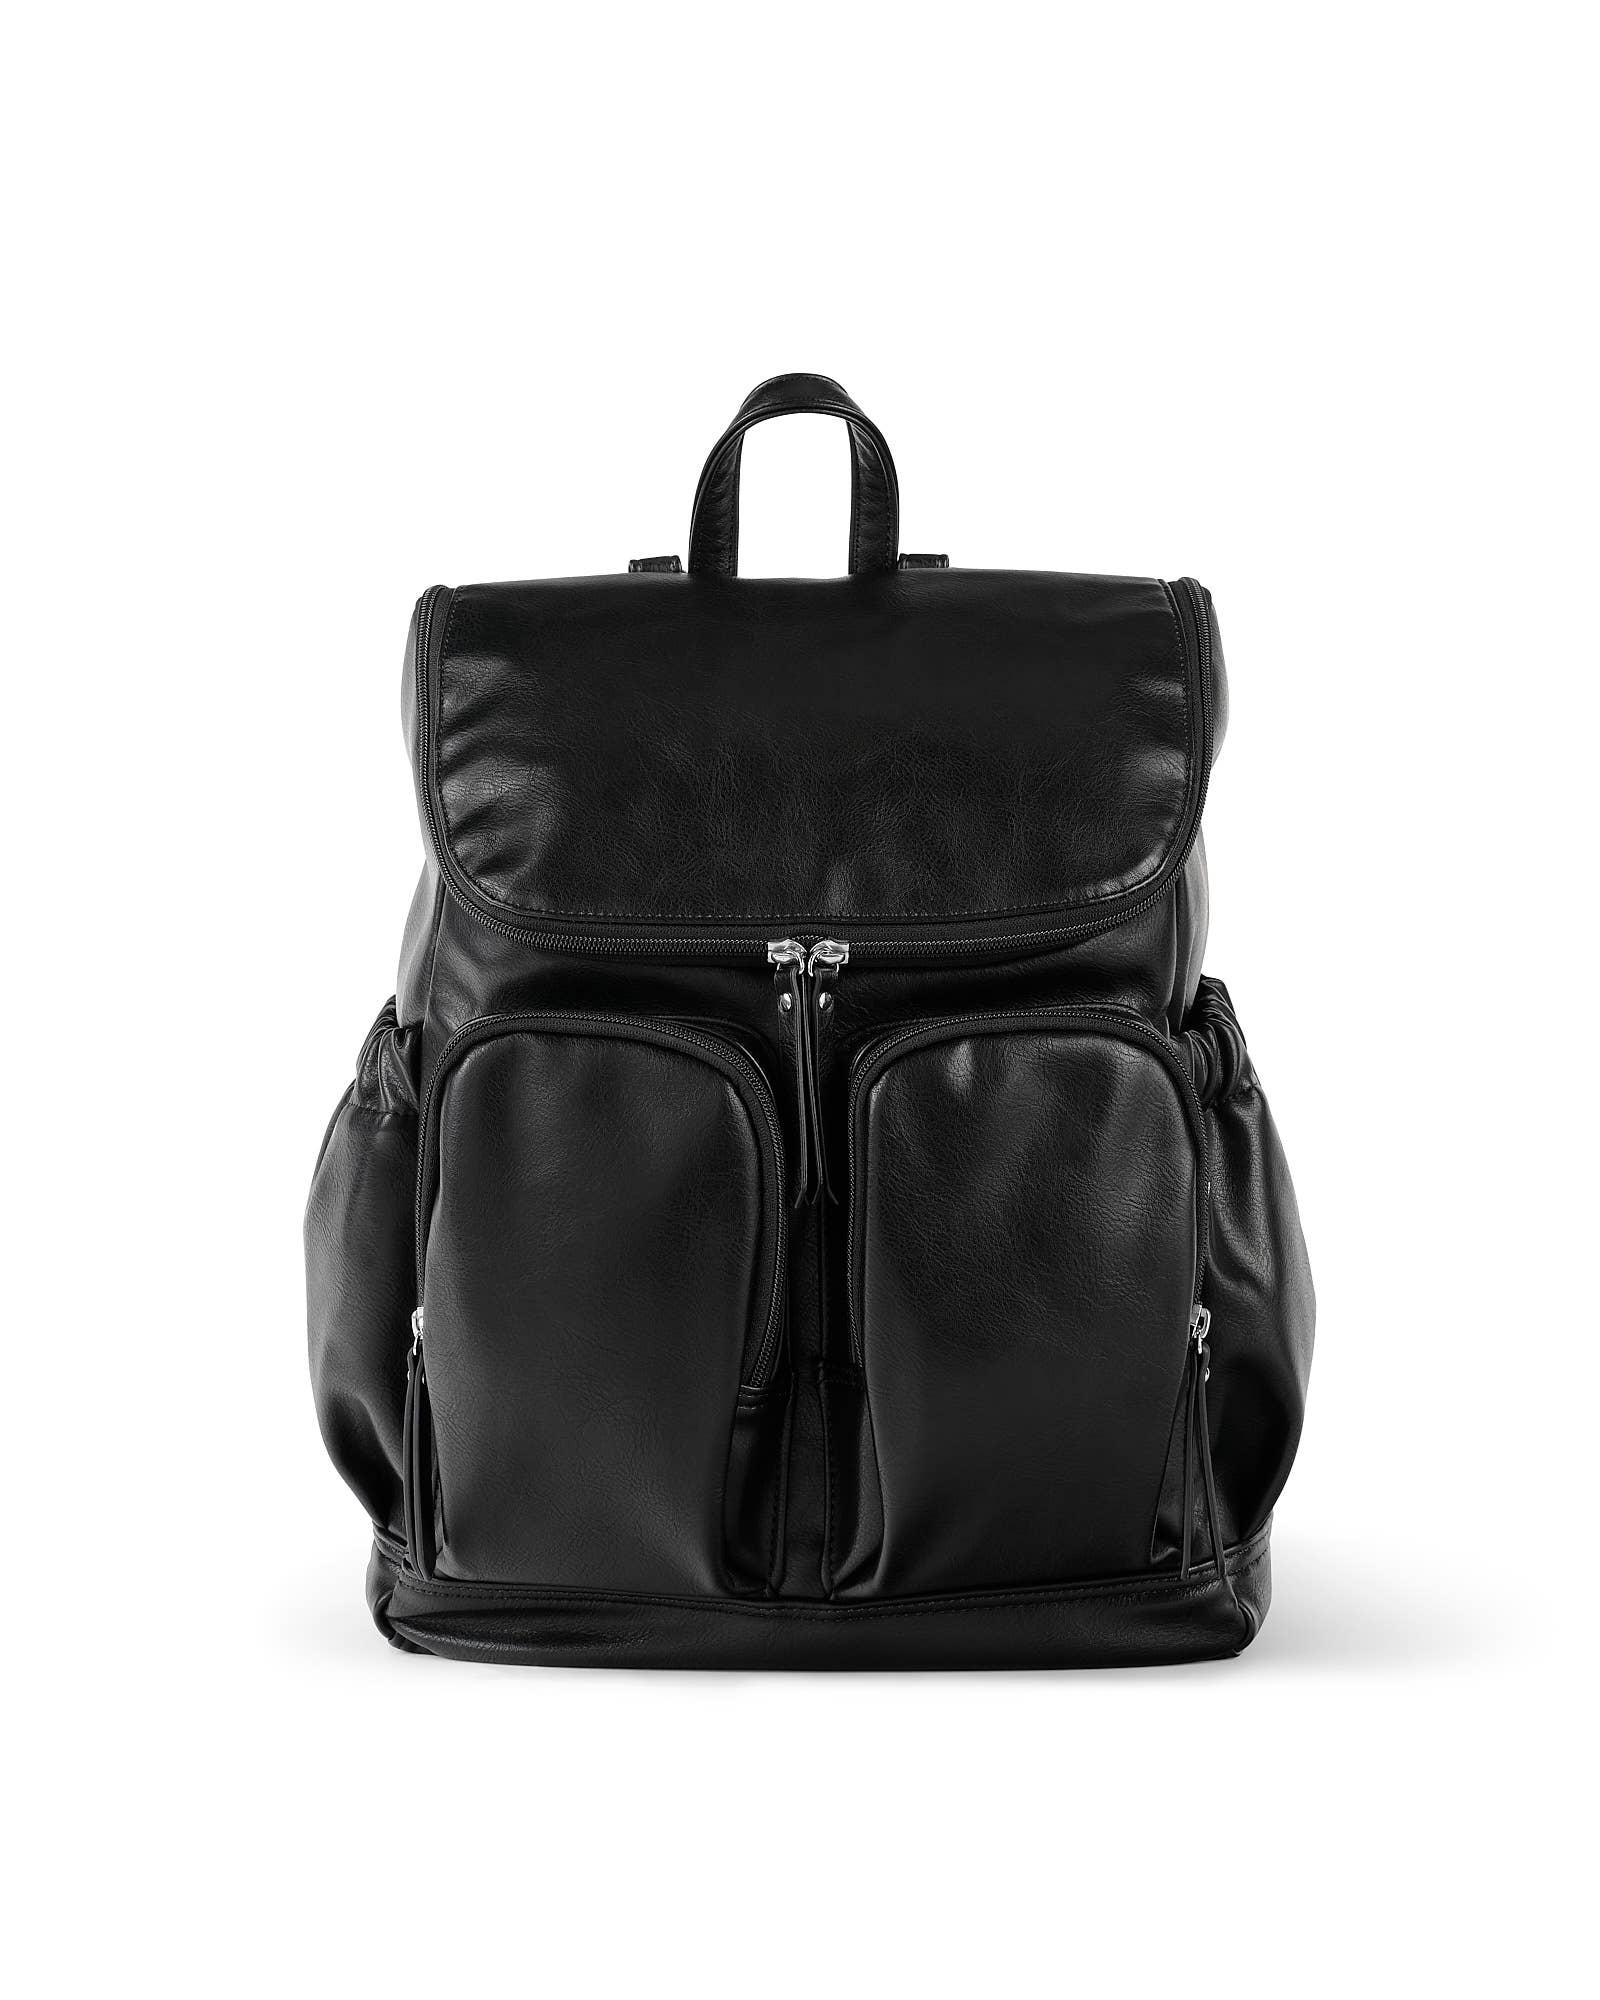 Signature Nappy Backpack - Black Faux Leather-bag-Oi Oi-PRE ORDER END OF AUGUST-Little Soldiers